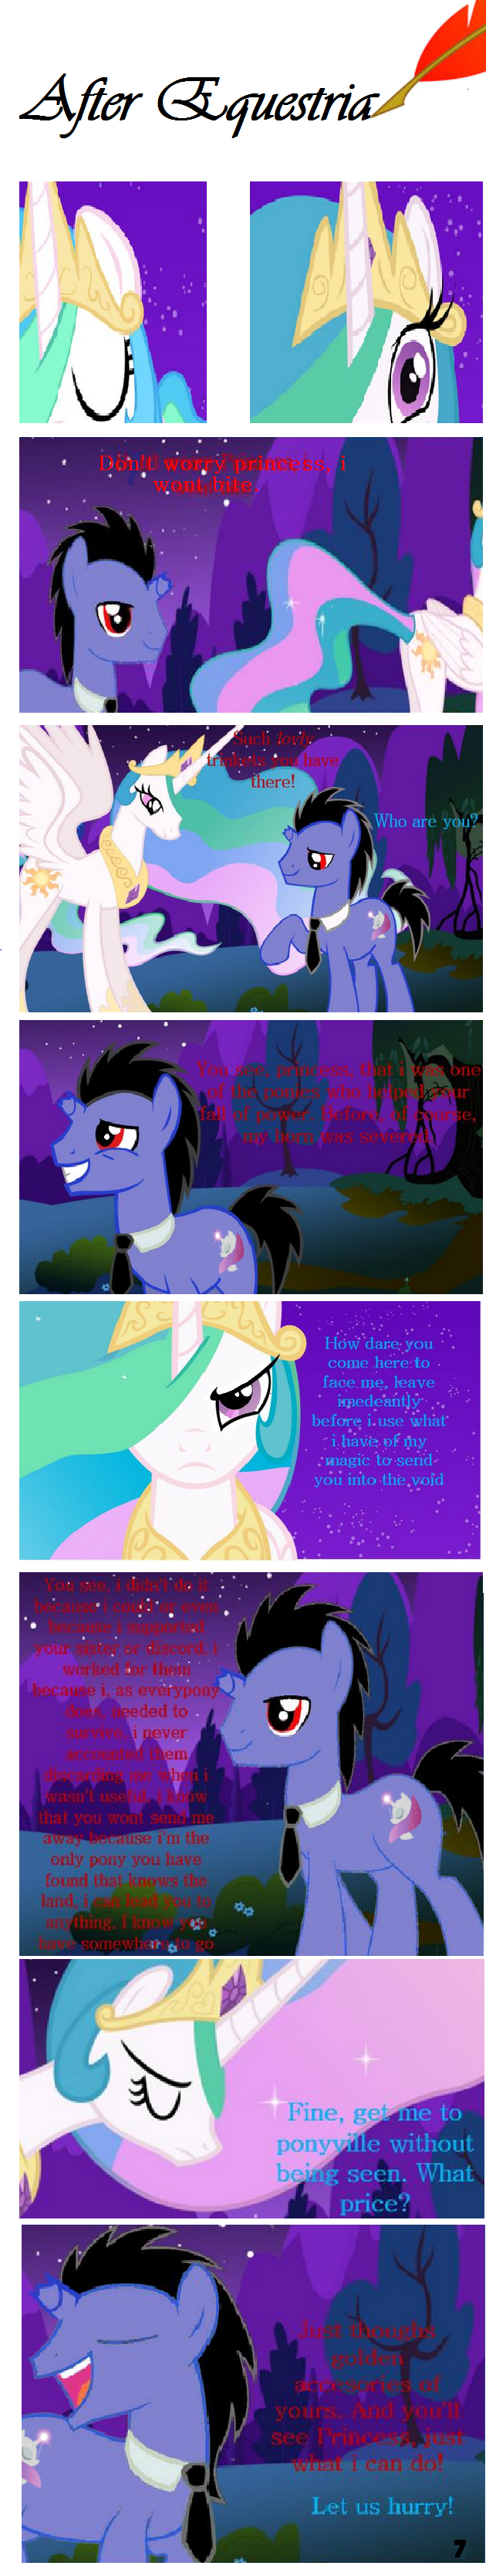 After Equestria pg. 7